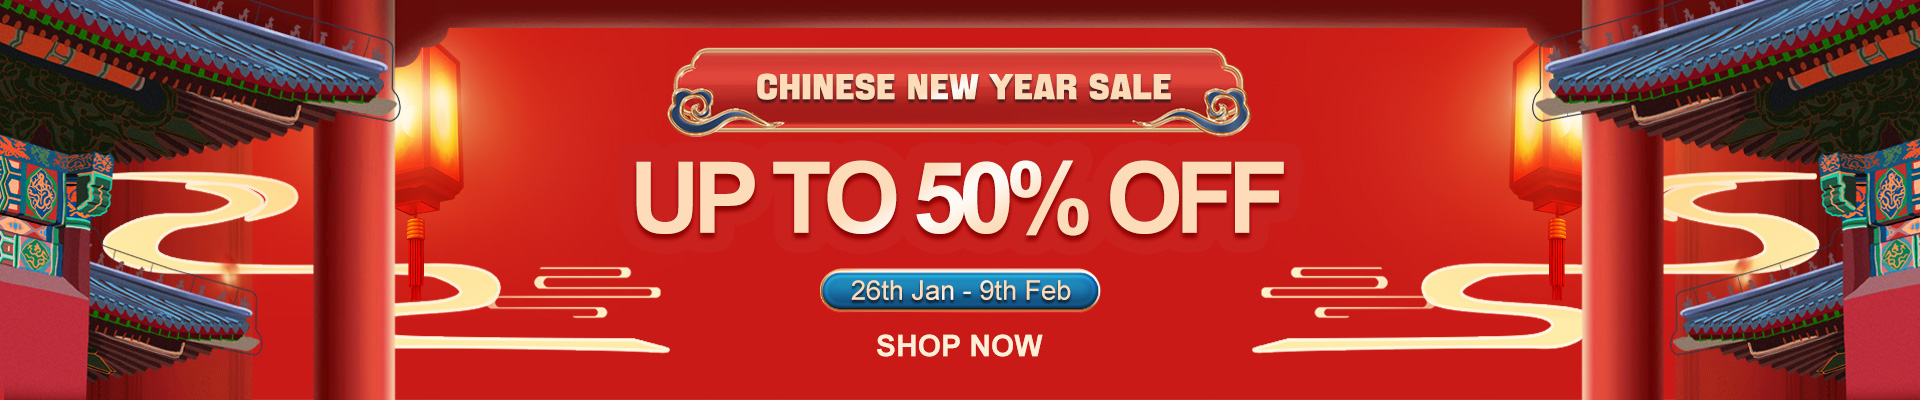 Chinese New Year Sale, UP TO 50% OFF